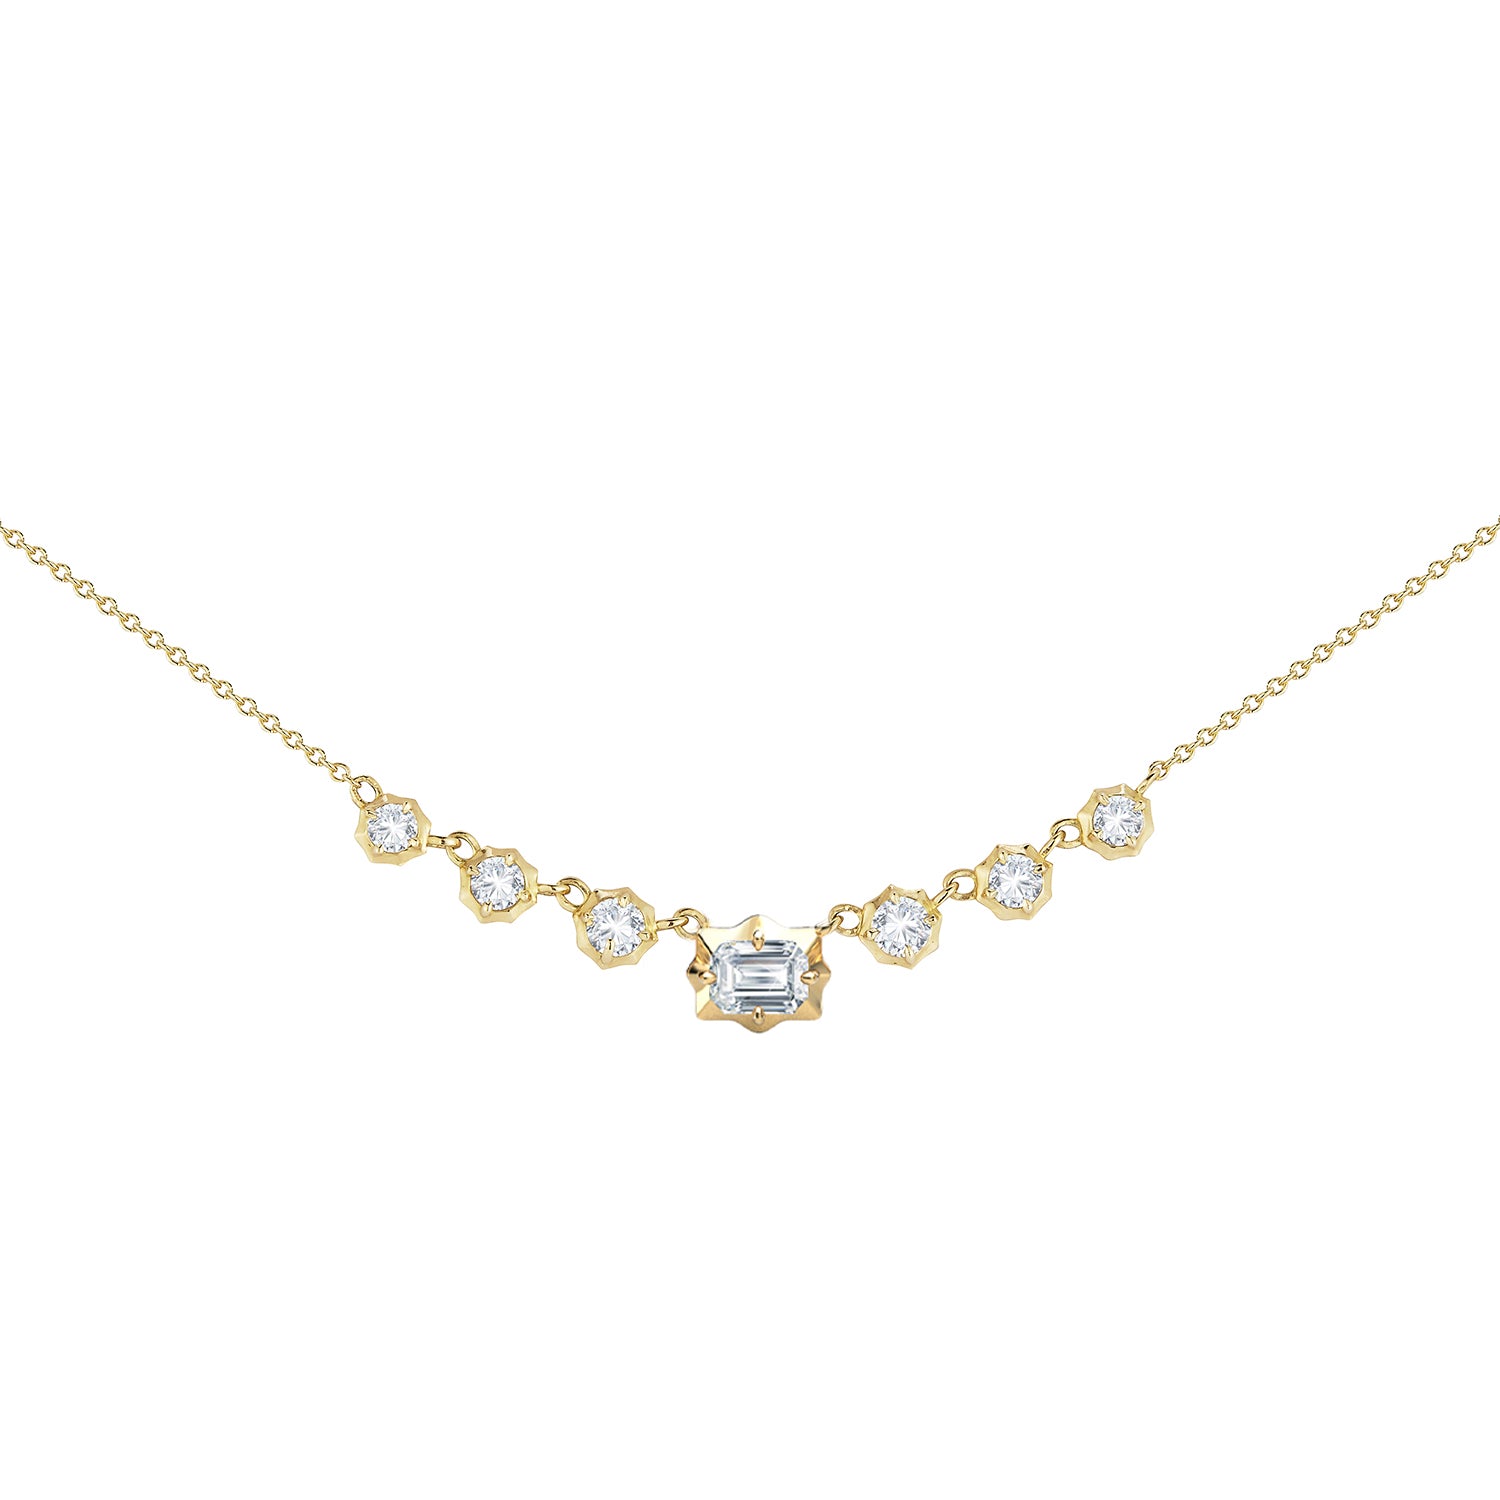 Small Vanguard Necklace in 18K Yellow Gold